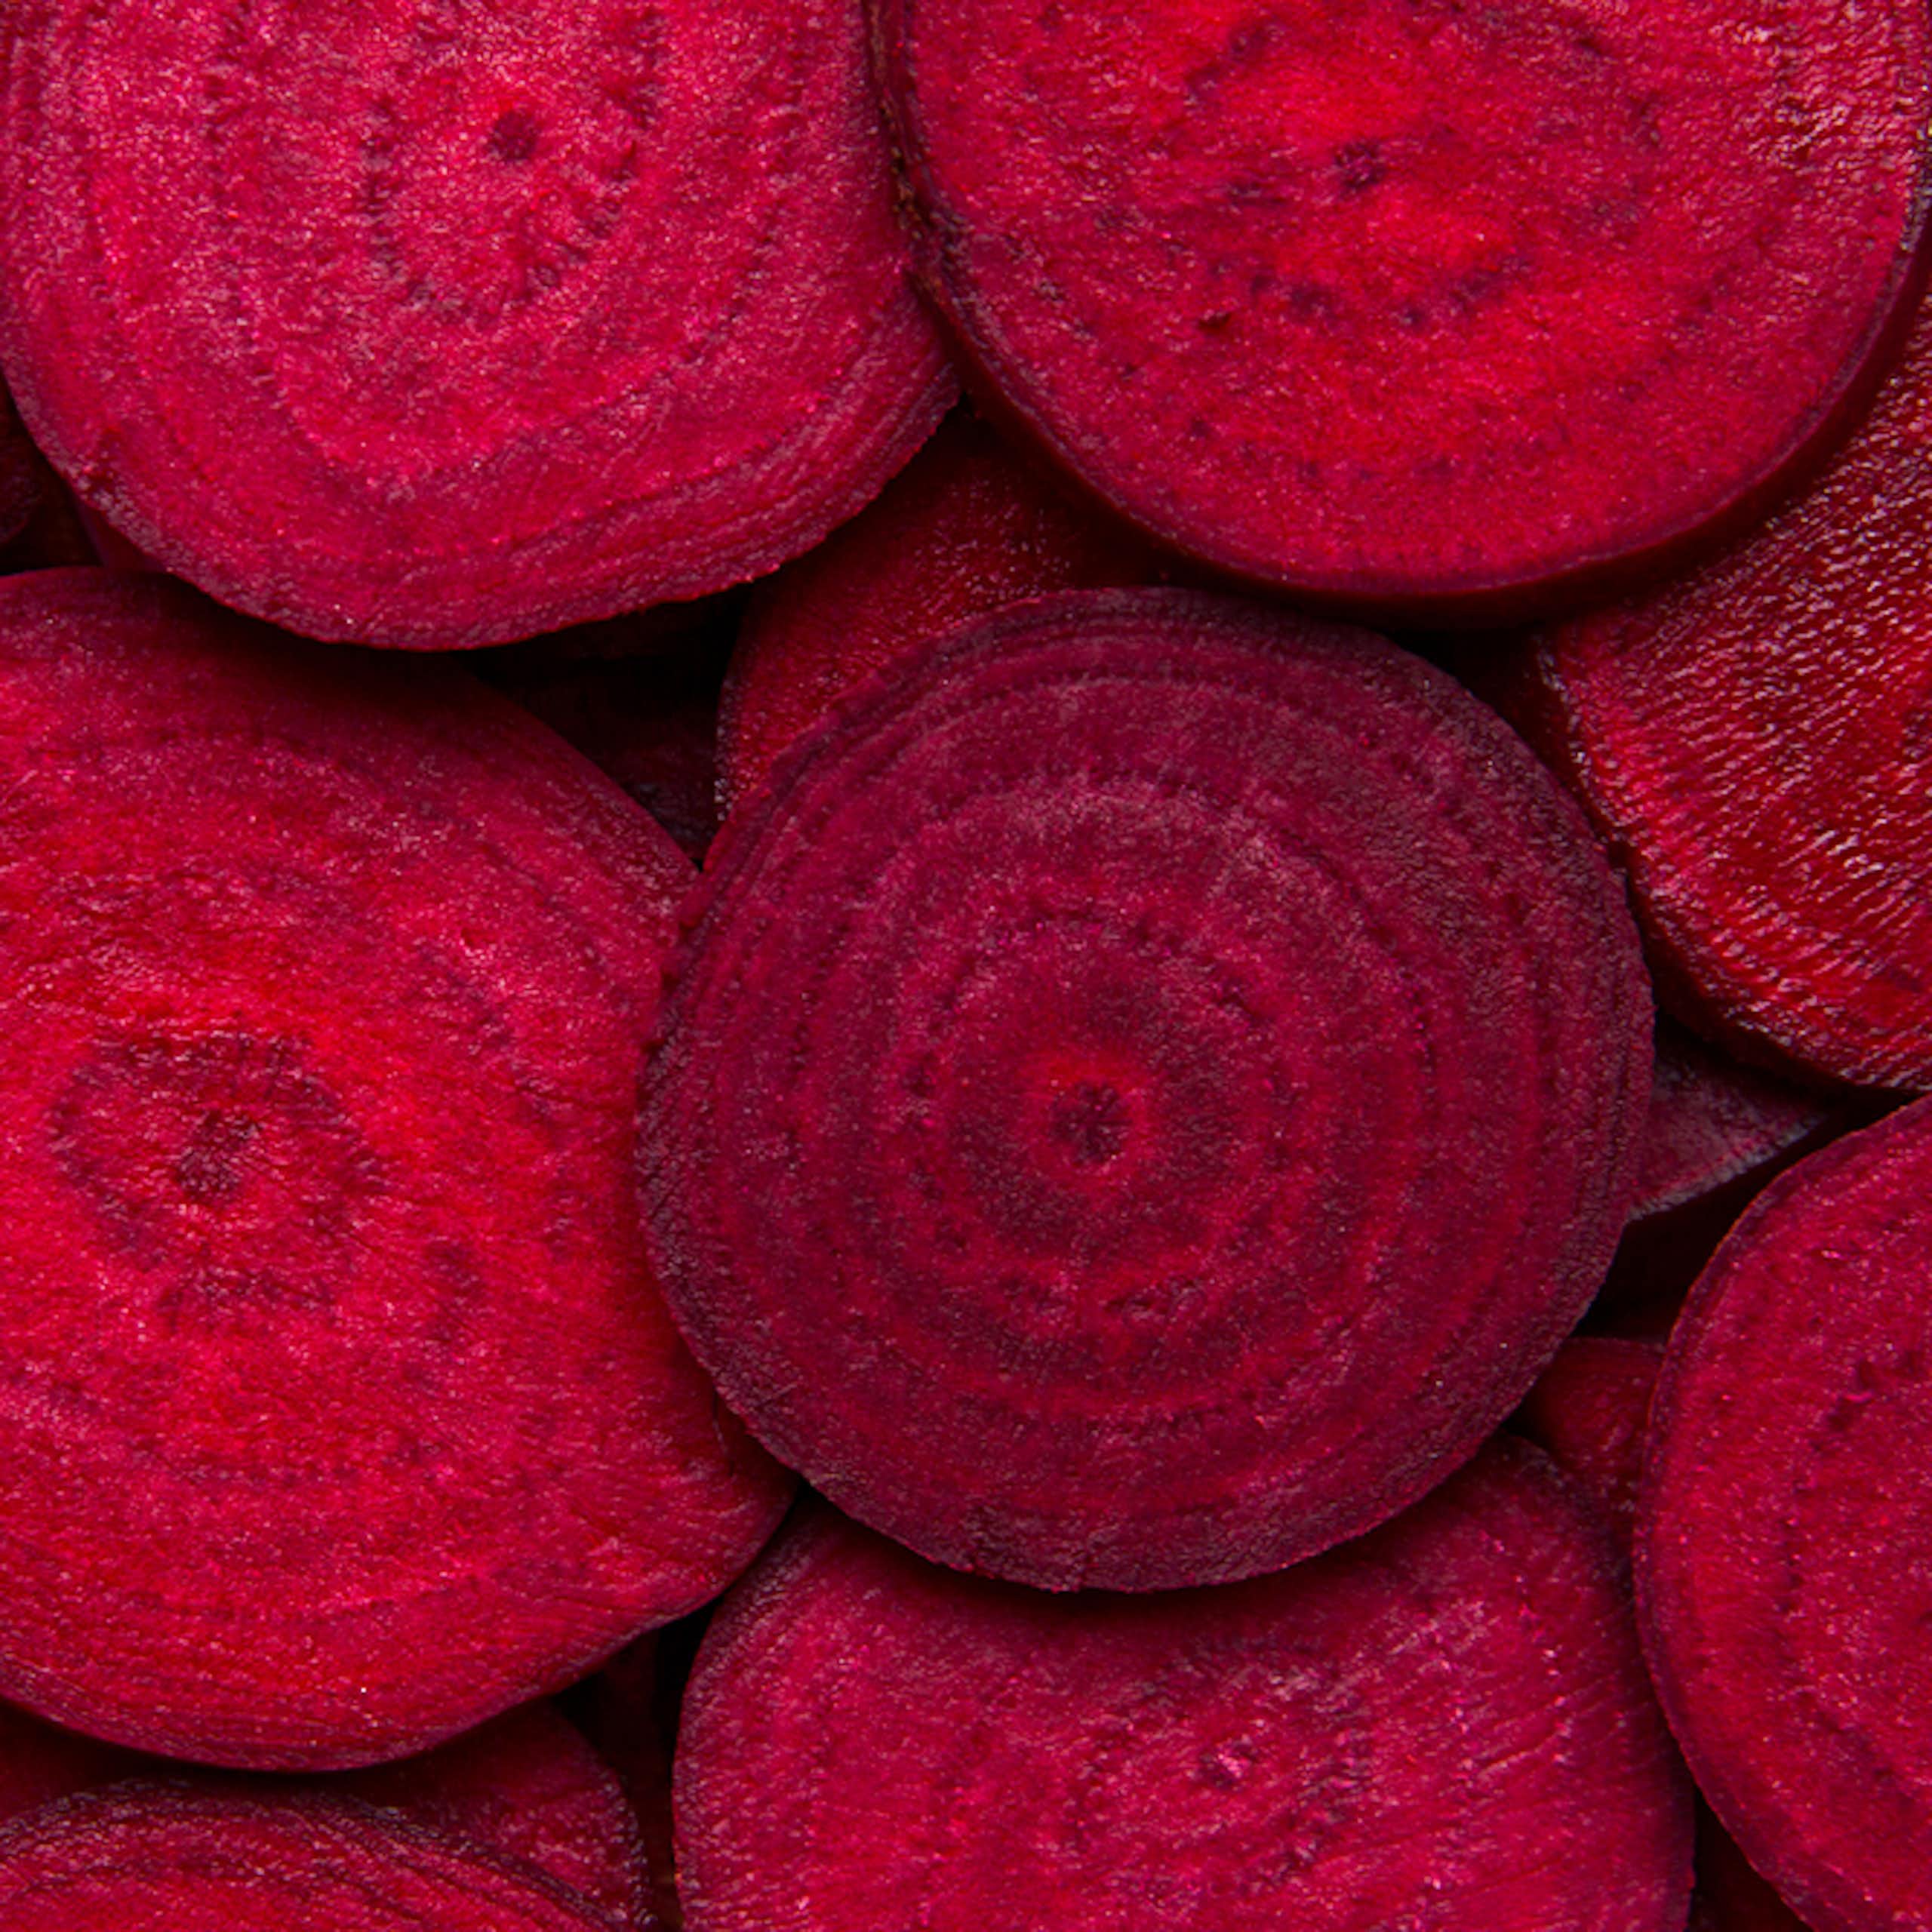 No, beetroot isn’t vegetable Viagra. But here’s what else it can do